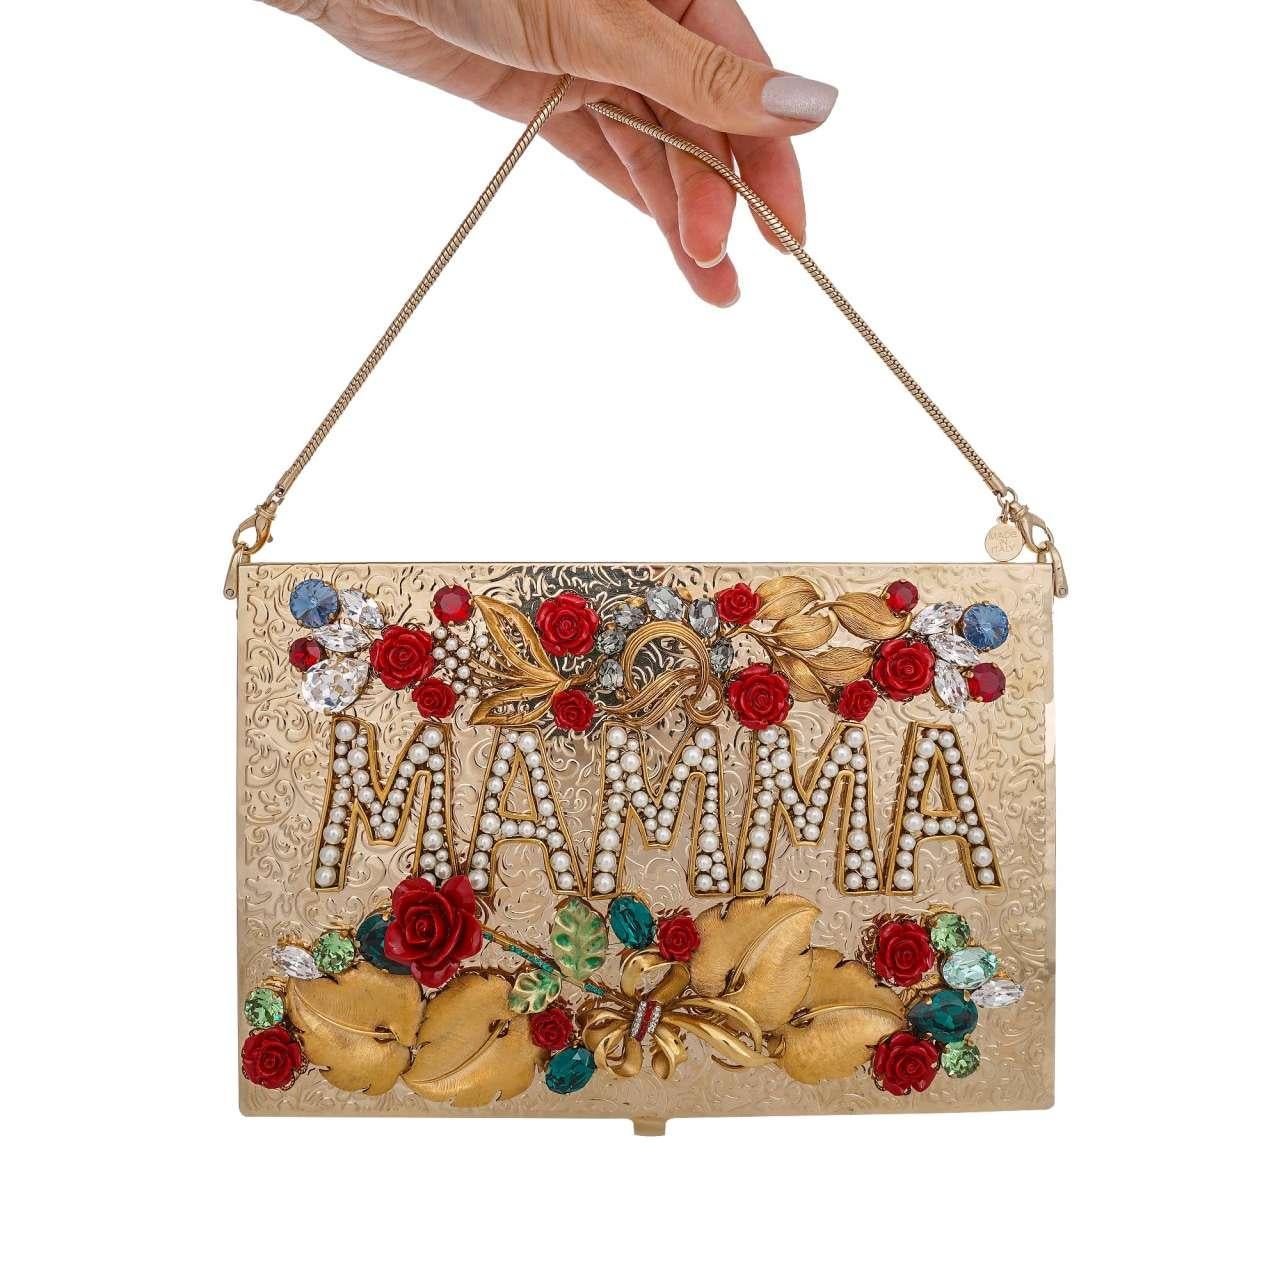 Dolce & Gabbana - Crystals and Roses Embellished Box Clutch Bag MAMMA Gold 1